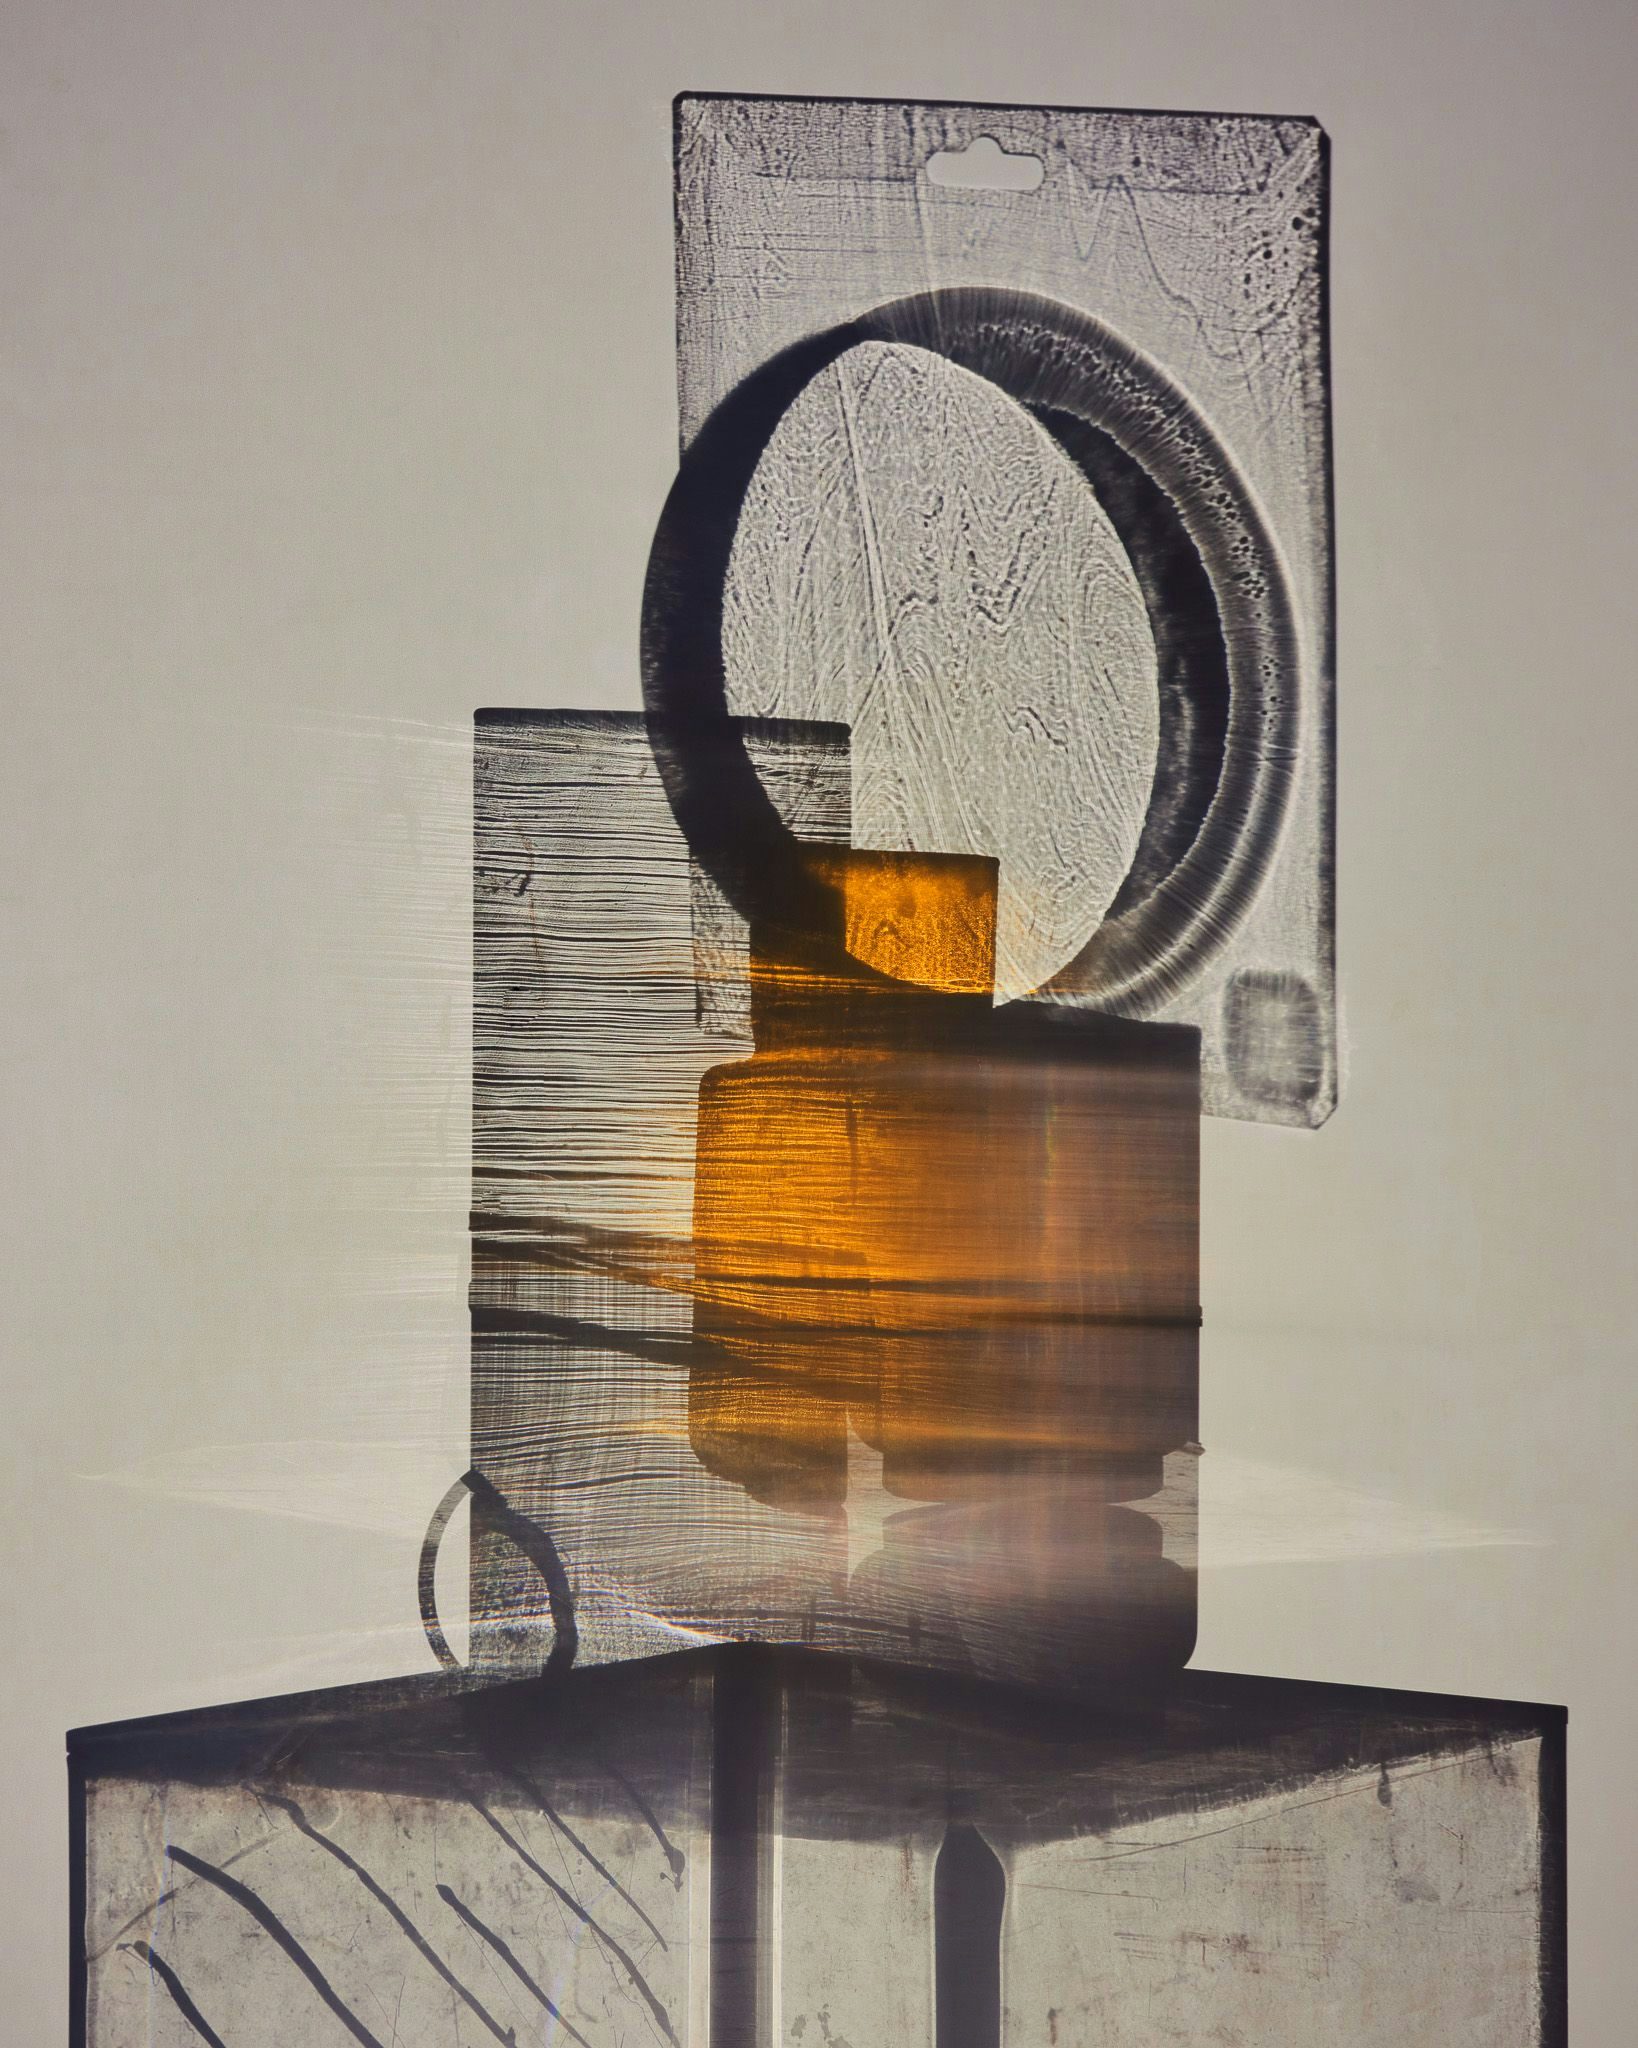  A photo showcasing an abstract setting of objects that let light through, with the set design created by Camille Boyer.